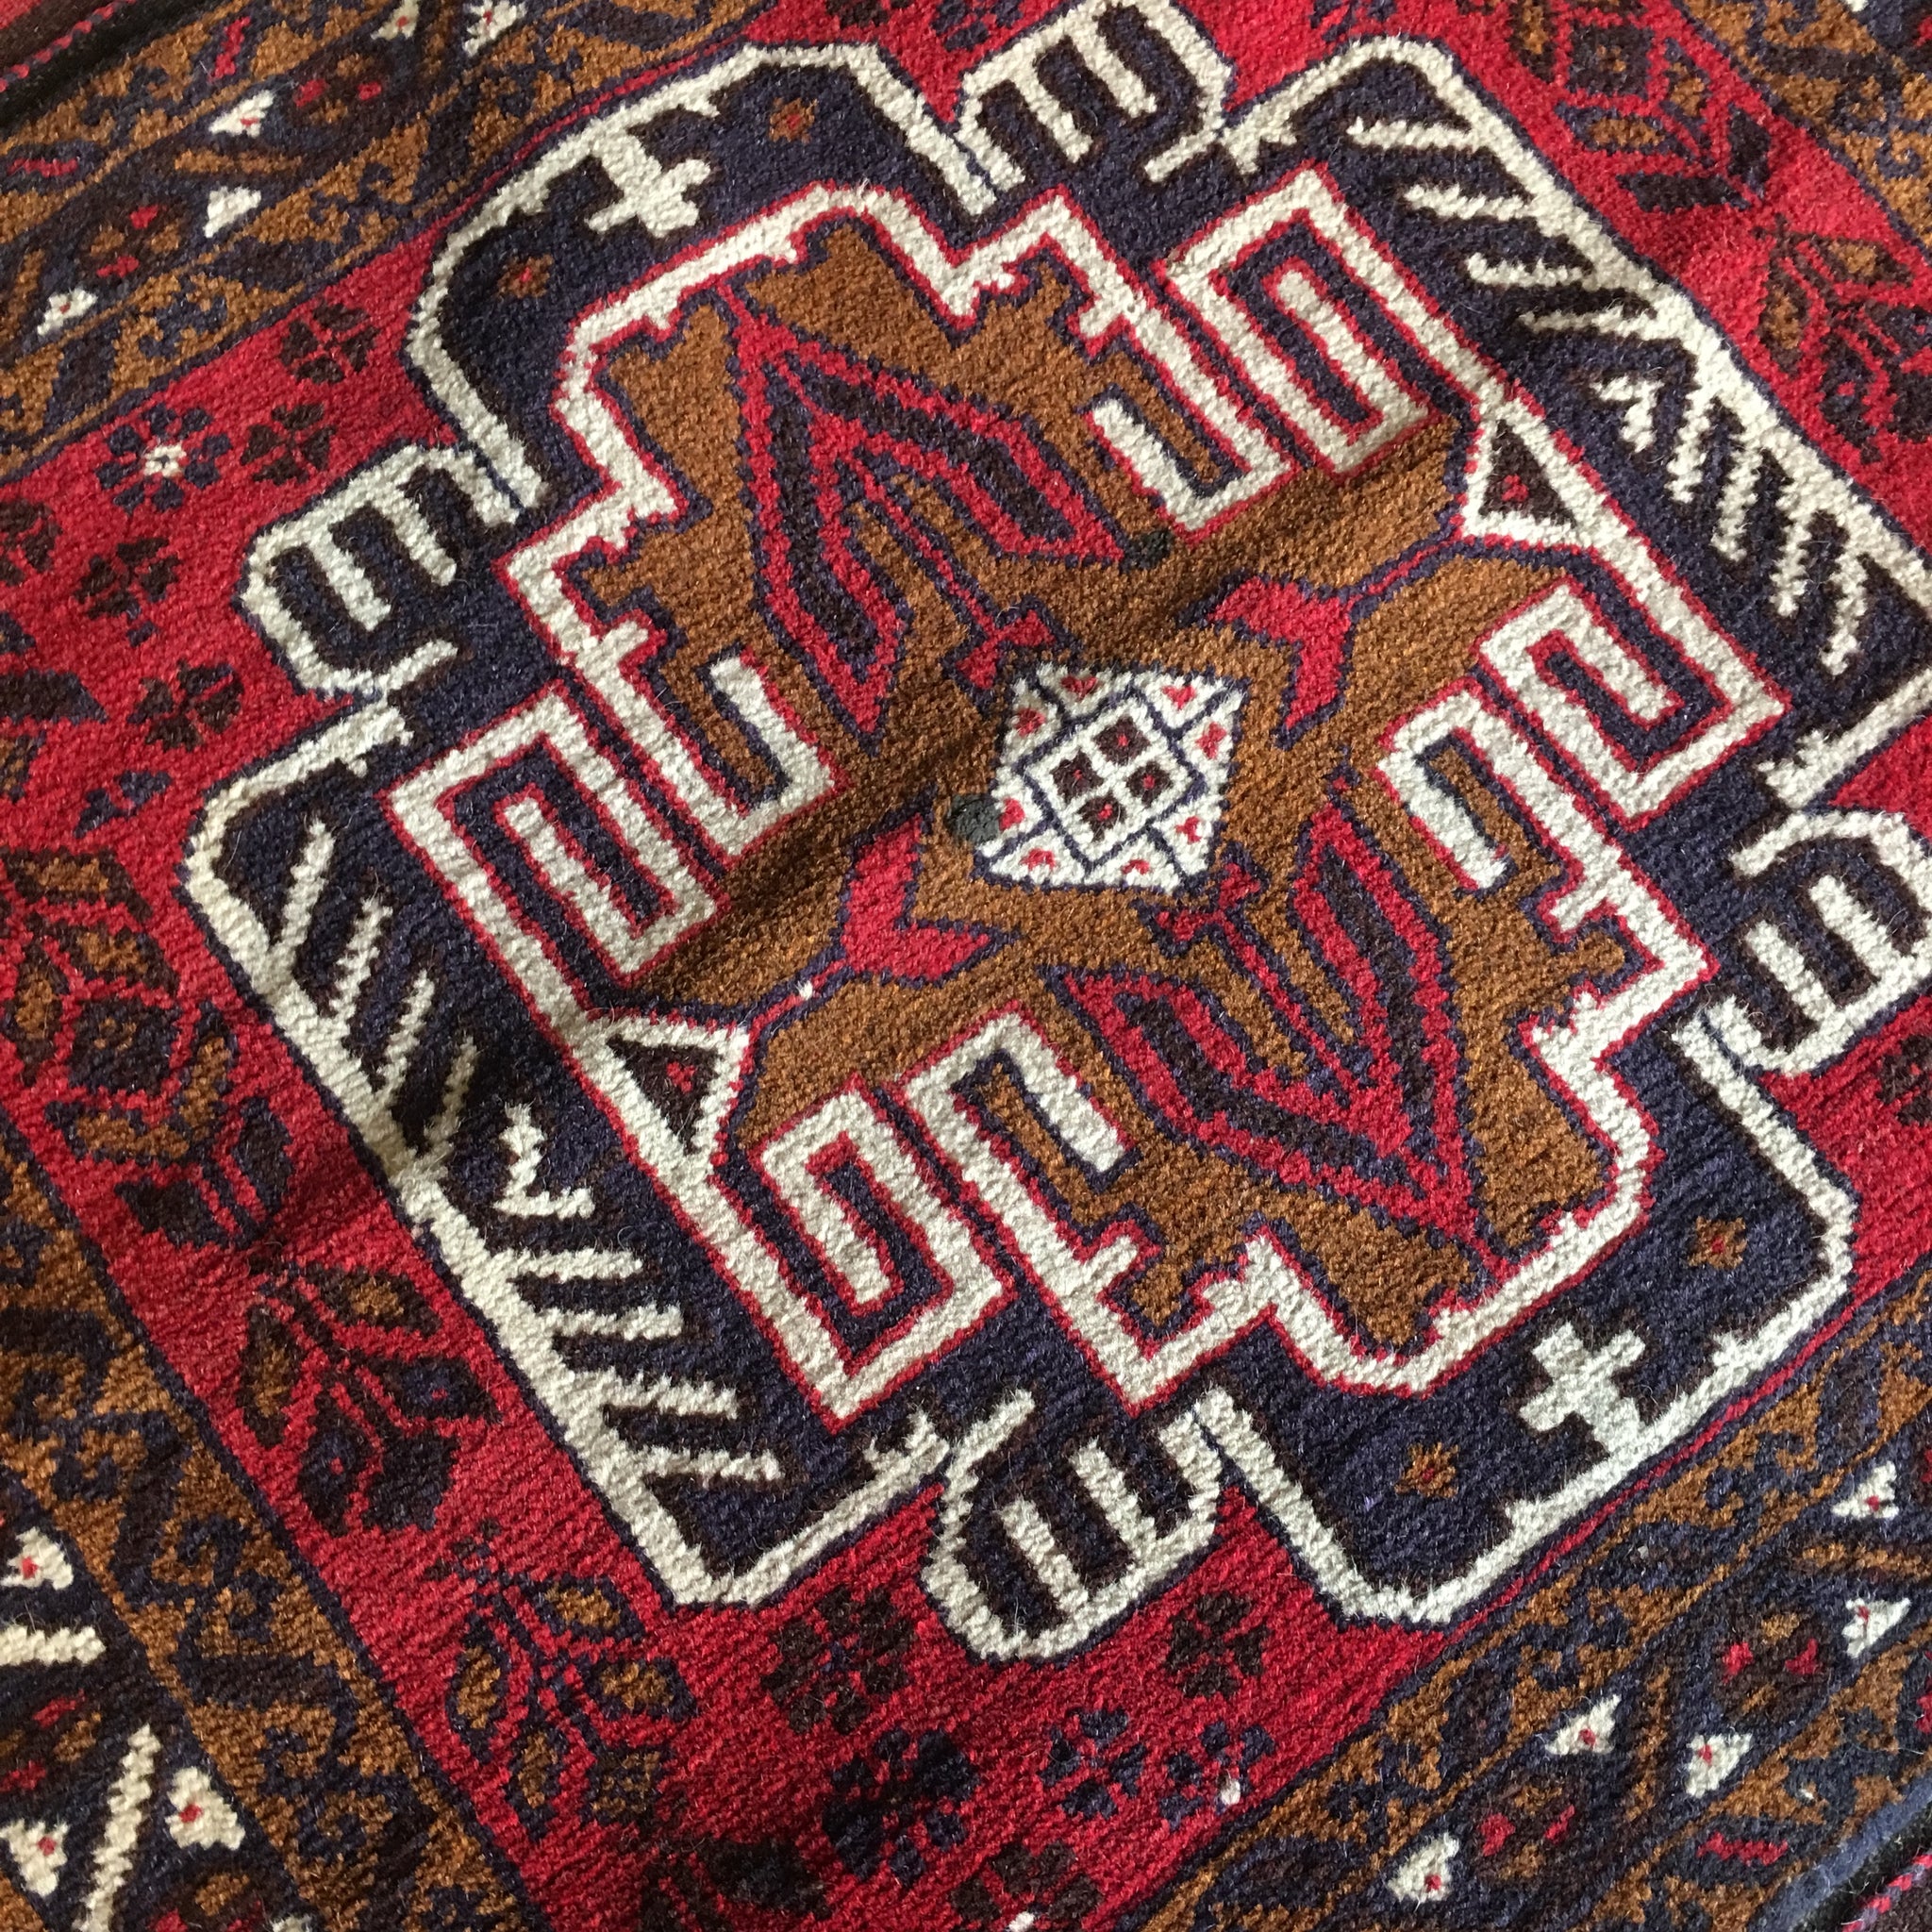 Rug - Red/Black Patterned Small Rug